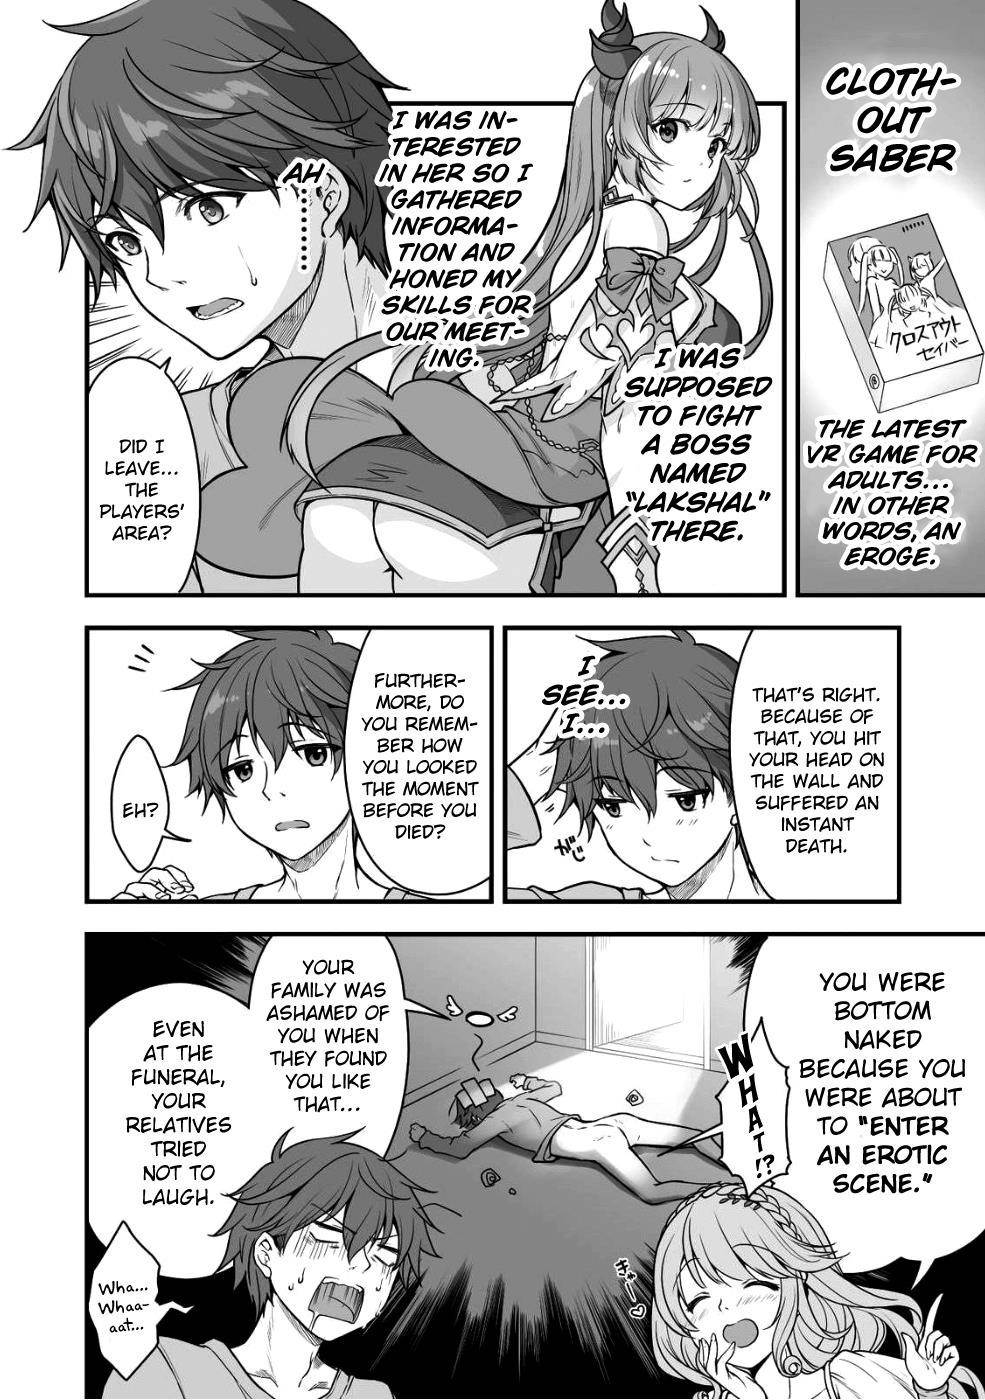 When I Was Playing Eroge With VR, I Was Reincarnated In A Different World, I Will Enslave All The Beautiful Demon Girls ~Crossout Saber~ Chapter 1 - Page 6